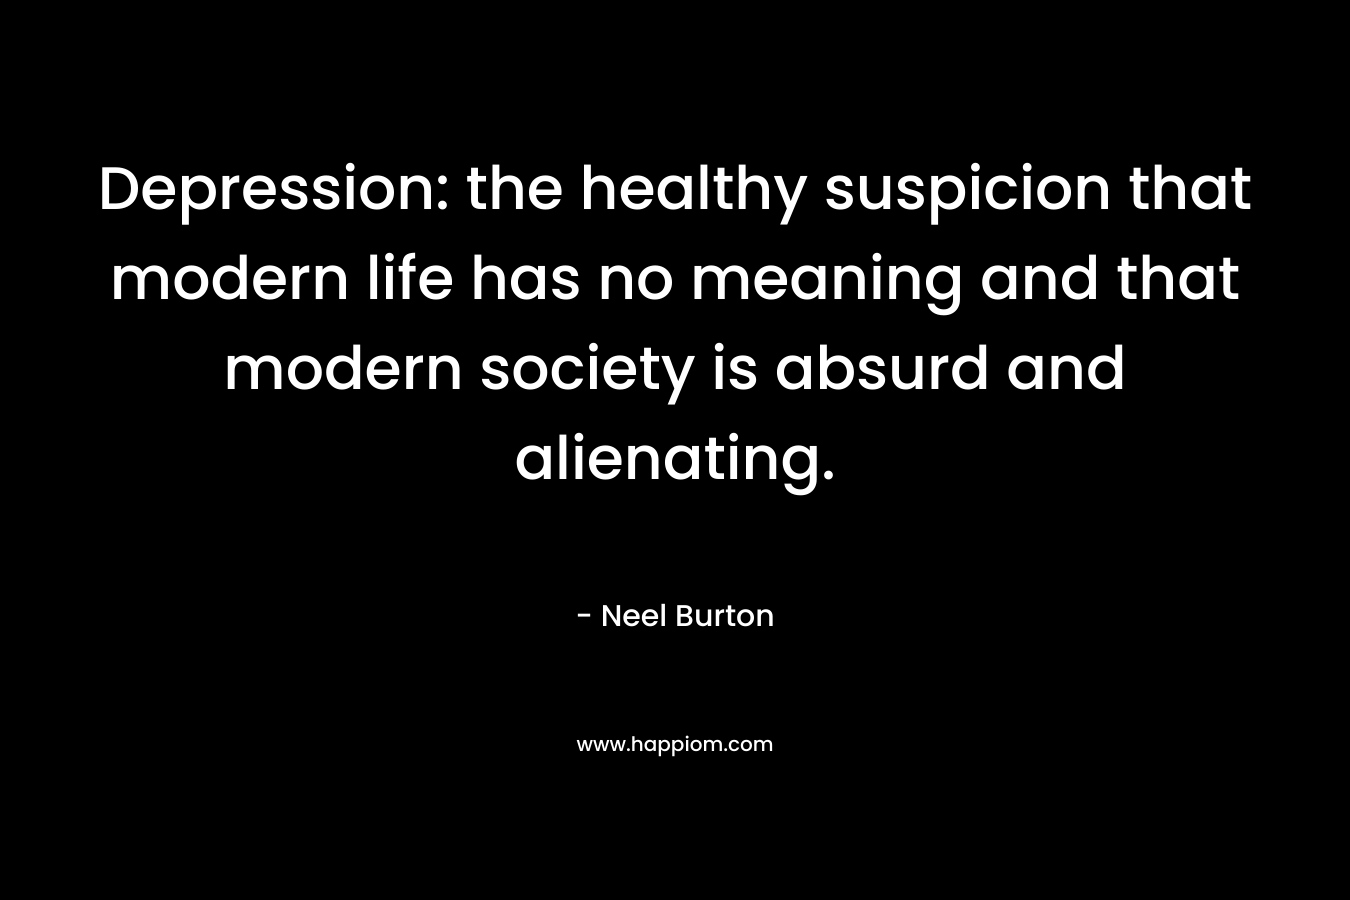 Depression: the healthy suspicion that modern life has no meaning and that modern society is absurd and alienating.